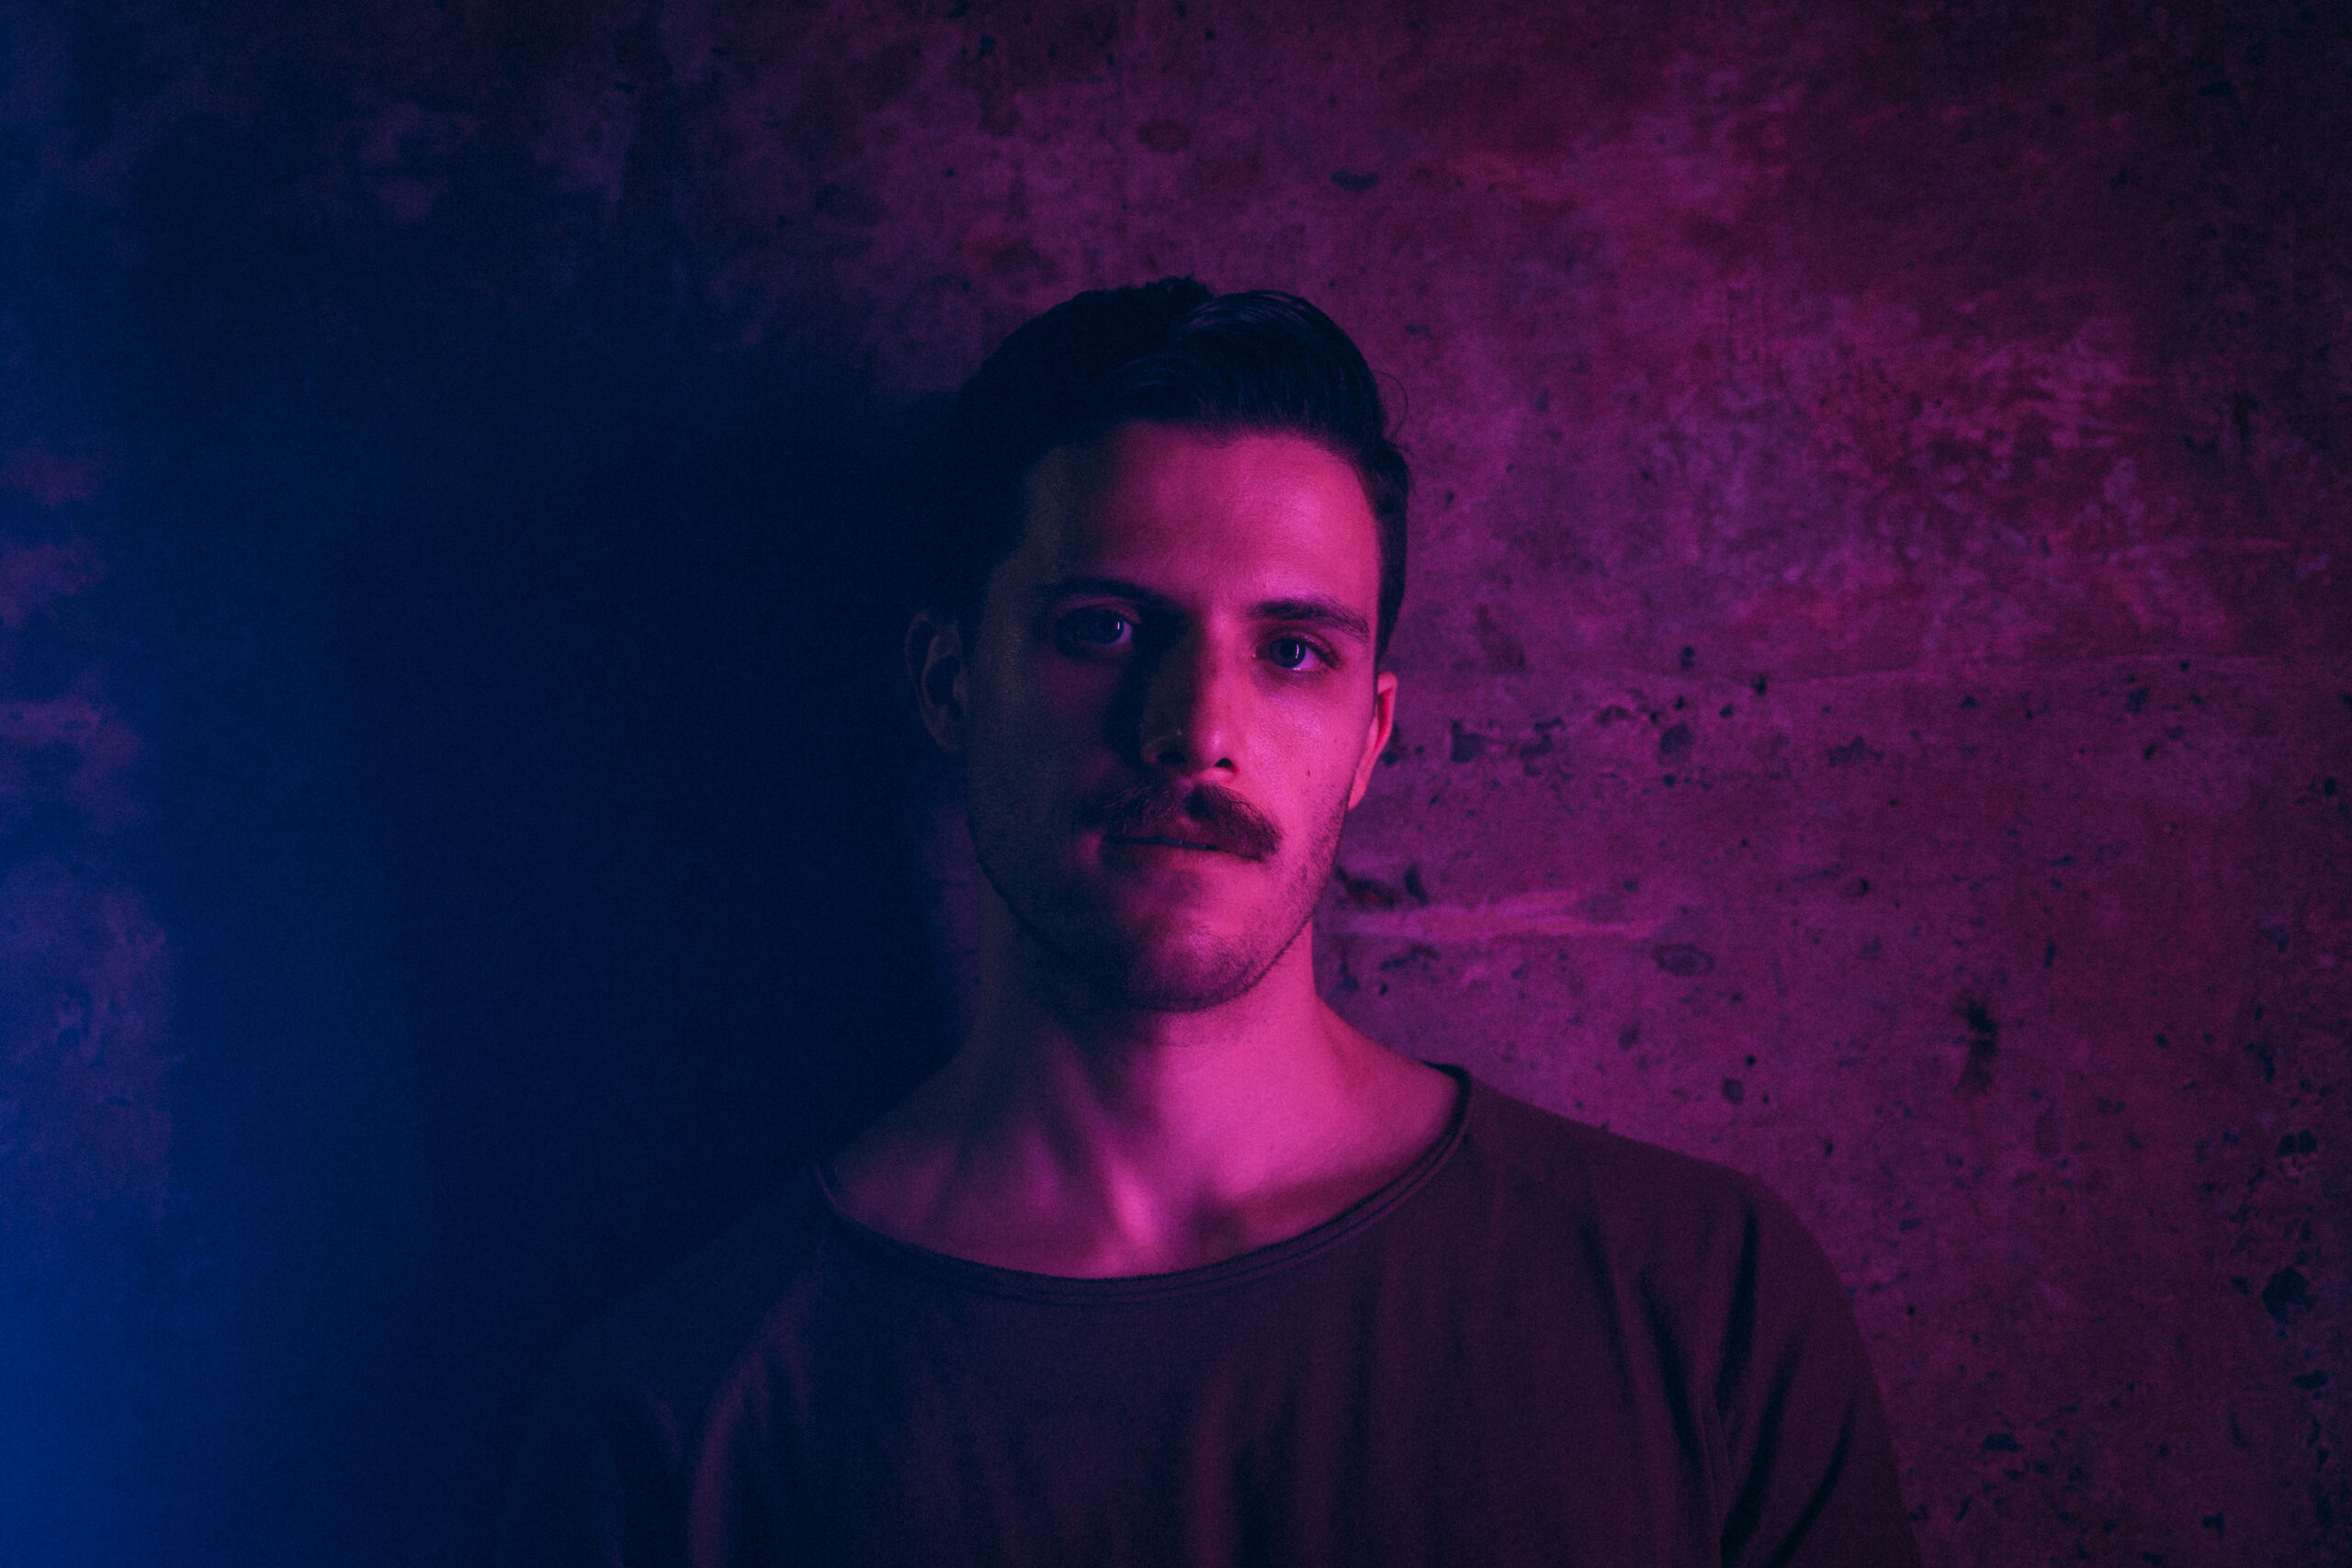 Enamour Returns to Anjunadeep with ‘Brush The Dust Off Your Soul’ EP